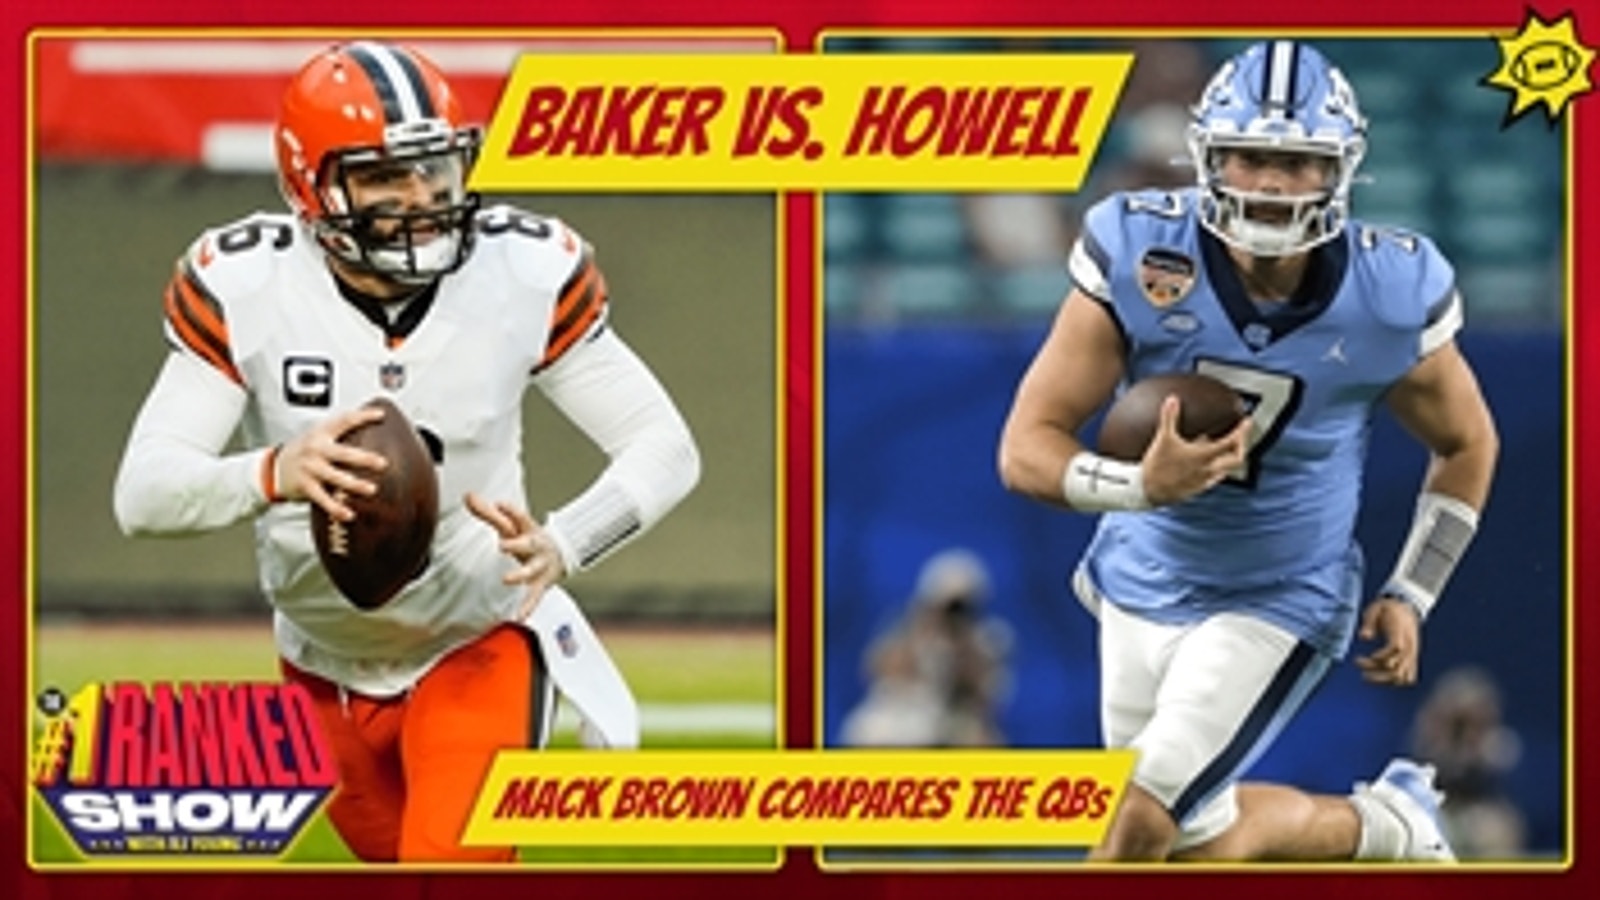 Sam Howell & Baker Mayfield — UNC's Mack Brown sees the some similarities